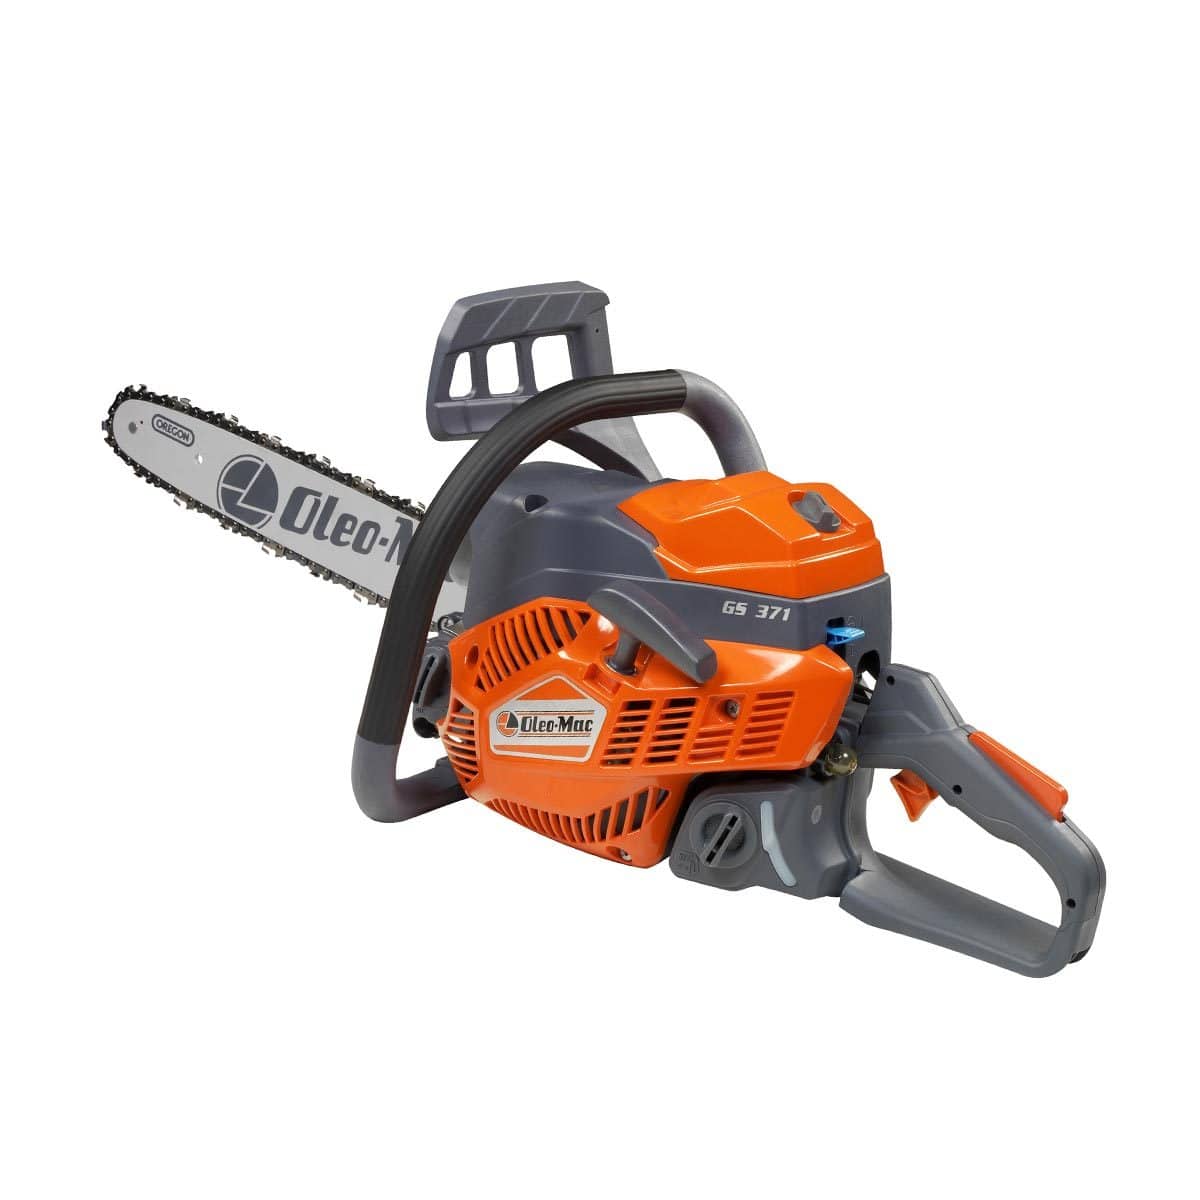 Oleo-Mac 2.4 HP Compact Chainsaw - GS 37 / GS 371 | Supply Master | Accra, Ghana Tools Building Steel Engineering Hardware tool